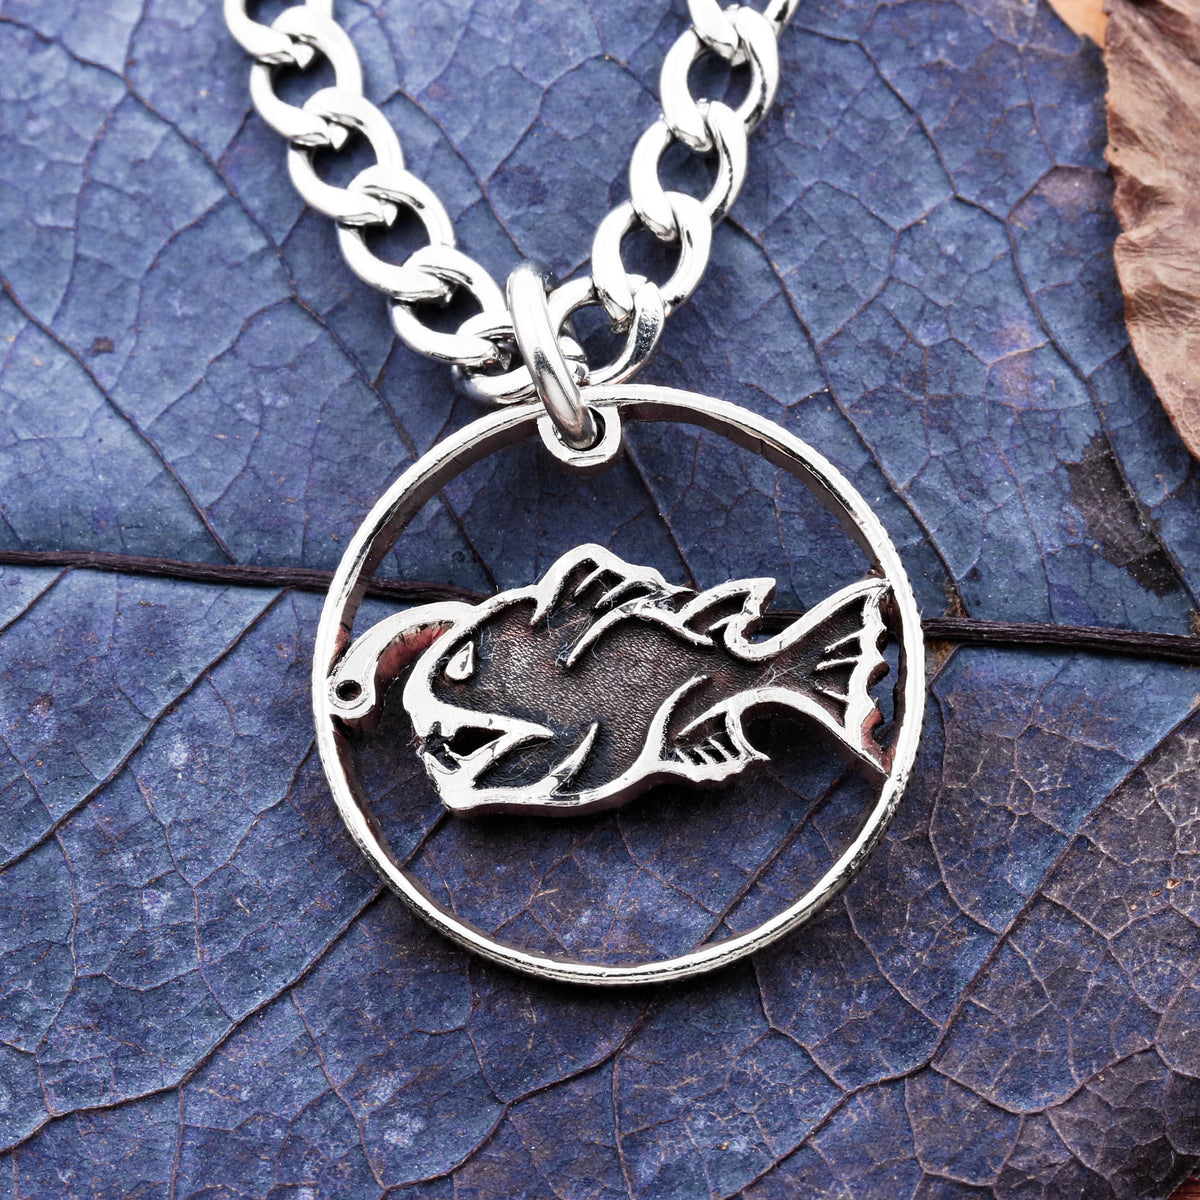 Engraved Anglerfish Necklace, Fish Jewelry